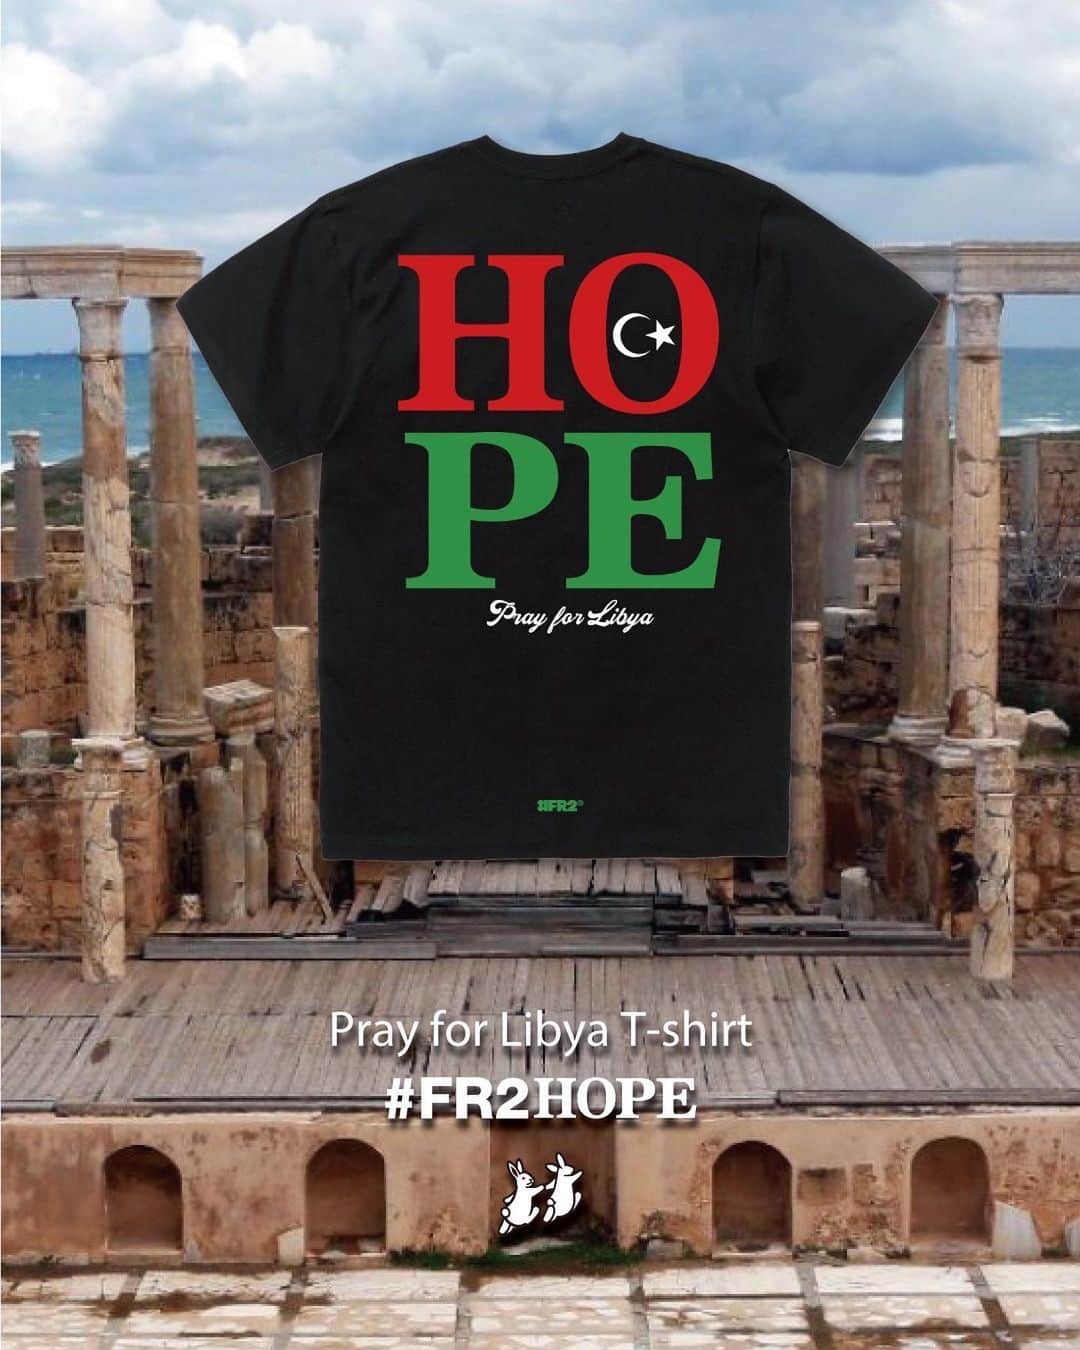 #FR2のインスタグラム：「#FR2Hope As a project, we will provide support for the disaster that occurred in Libya on September 10th. Starting today, we will start accepting orders at the #FR2 Online Store. All proceeds from product sales, minus the costs involved in producing this project, will be donated to the Japanese Red Cross Society.  Starting today, we will start accepting orders at the #FR2 online store. All proceeds from the sales of the low-cost products produced in this project will be donated to the Japanese Red Cross Society.  Order period: September 14th (Thursday) to September 20th (Wednesday), 2023  #FR2希望 プロジェクトとして、9月10日にリビアで発生した災害への支援を行います。 本日から #FR2 Online Storeで受注販売を開始いたします。 こちらの企画の制作にかかわるコストを引いた商品の売上の全ては、日本赤十字社に寄付します。  本日より#FR2オンラインストアで受注販売を開始いたします。 こちらの企画の制作にコストを抑えた商品の売上の全ては、日本赤十字社に寄付します。  受注期間：2023年9月14日（木）～20日（水）  #FR2Hope 作为一个项目，我们将为 9 月 10 日在利比亚发生的灾难提供支持。 从今天开始，我们将开始在 #FR2 在线商店接受订单。 产品销售的所有收益，减去制作该项目所涉及的成本，将捐赠给日本红十字会。  从今天开始，我们将开始在 #FR2 在线商店接受订单。 该项目生产的低成本产品的销售收入将全部捐赠给日本红十字会。  订购期间：2023年9月14日（星期四）至9月20日（星期三）  #FR2Hope 作為一個項目，我們將為 9 月 10 日在利比亞發生的災難提供支持。 從今天開始，我們將開始在 #FR2 在線商店接受訂單。 產品銷售的所有收益，減去製作該項目所涉及的成本，將捐贈給日本紅十字會。  從今天開始，我們將開始在 #FR2 在線商店接受訂單。 該項目生產的低成本產品的銷售收入將全部捐贈給日本紅十字會。  訂購期間：2023年9月14日（星期四）至9月20日（星期三）  #FR2希望　#FR2HOPE」